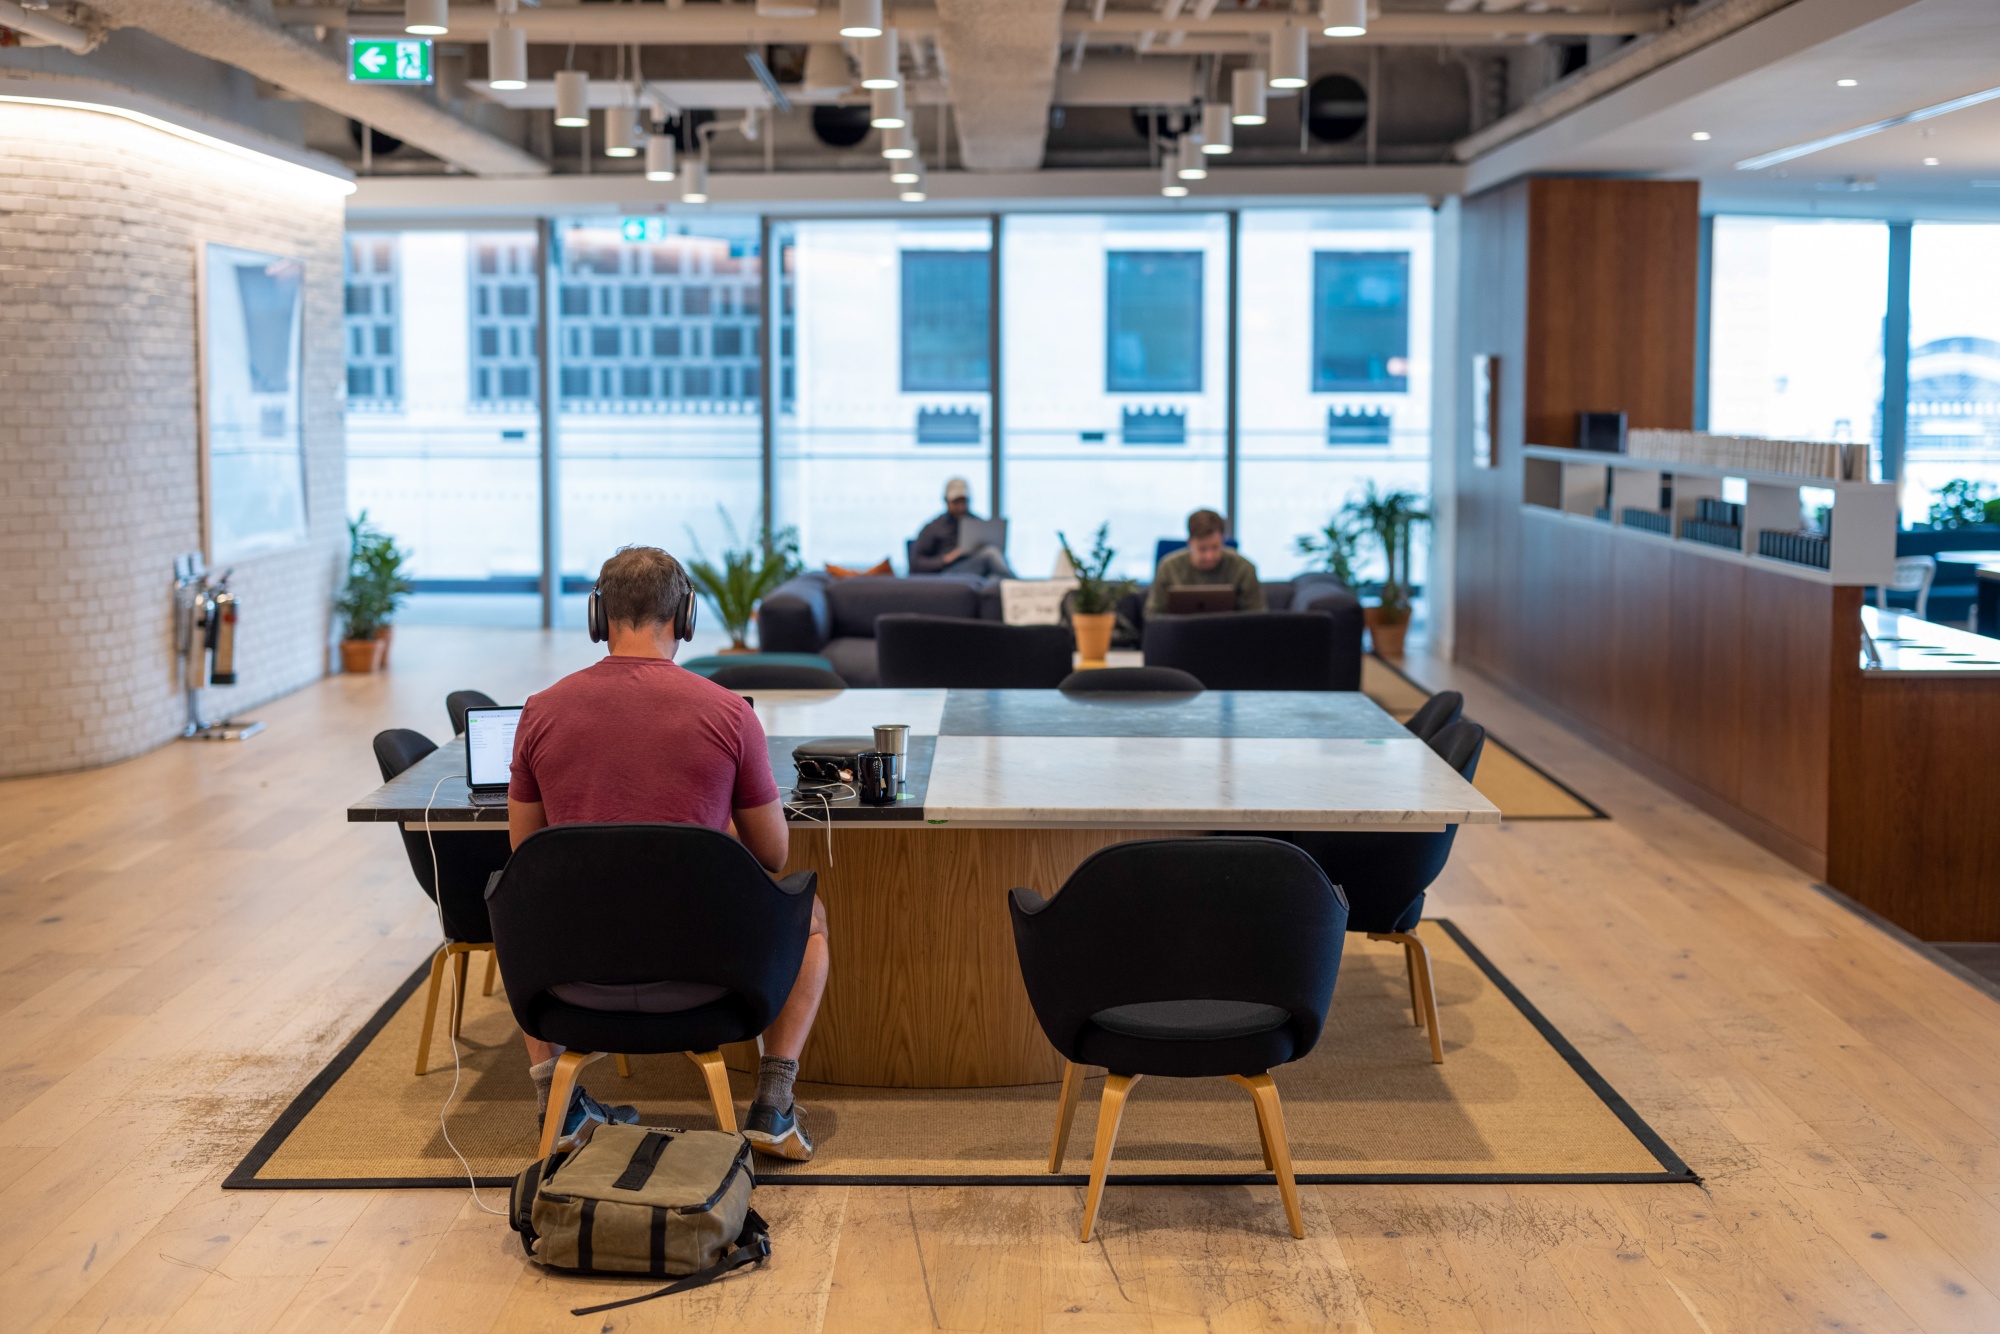 Office workers at desks in a co-working space.